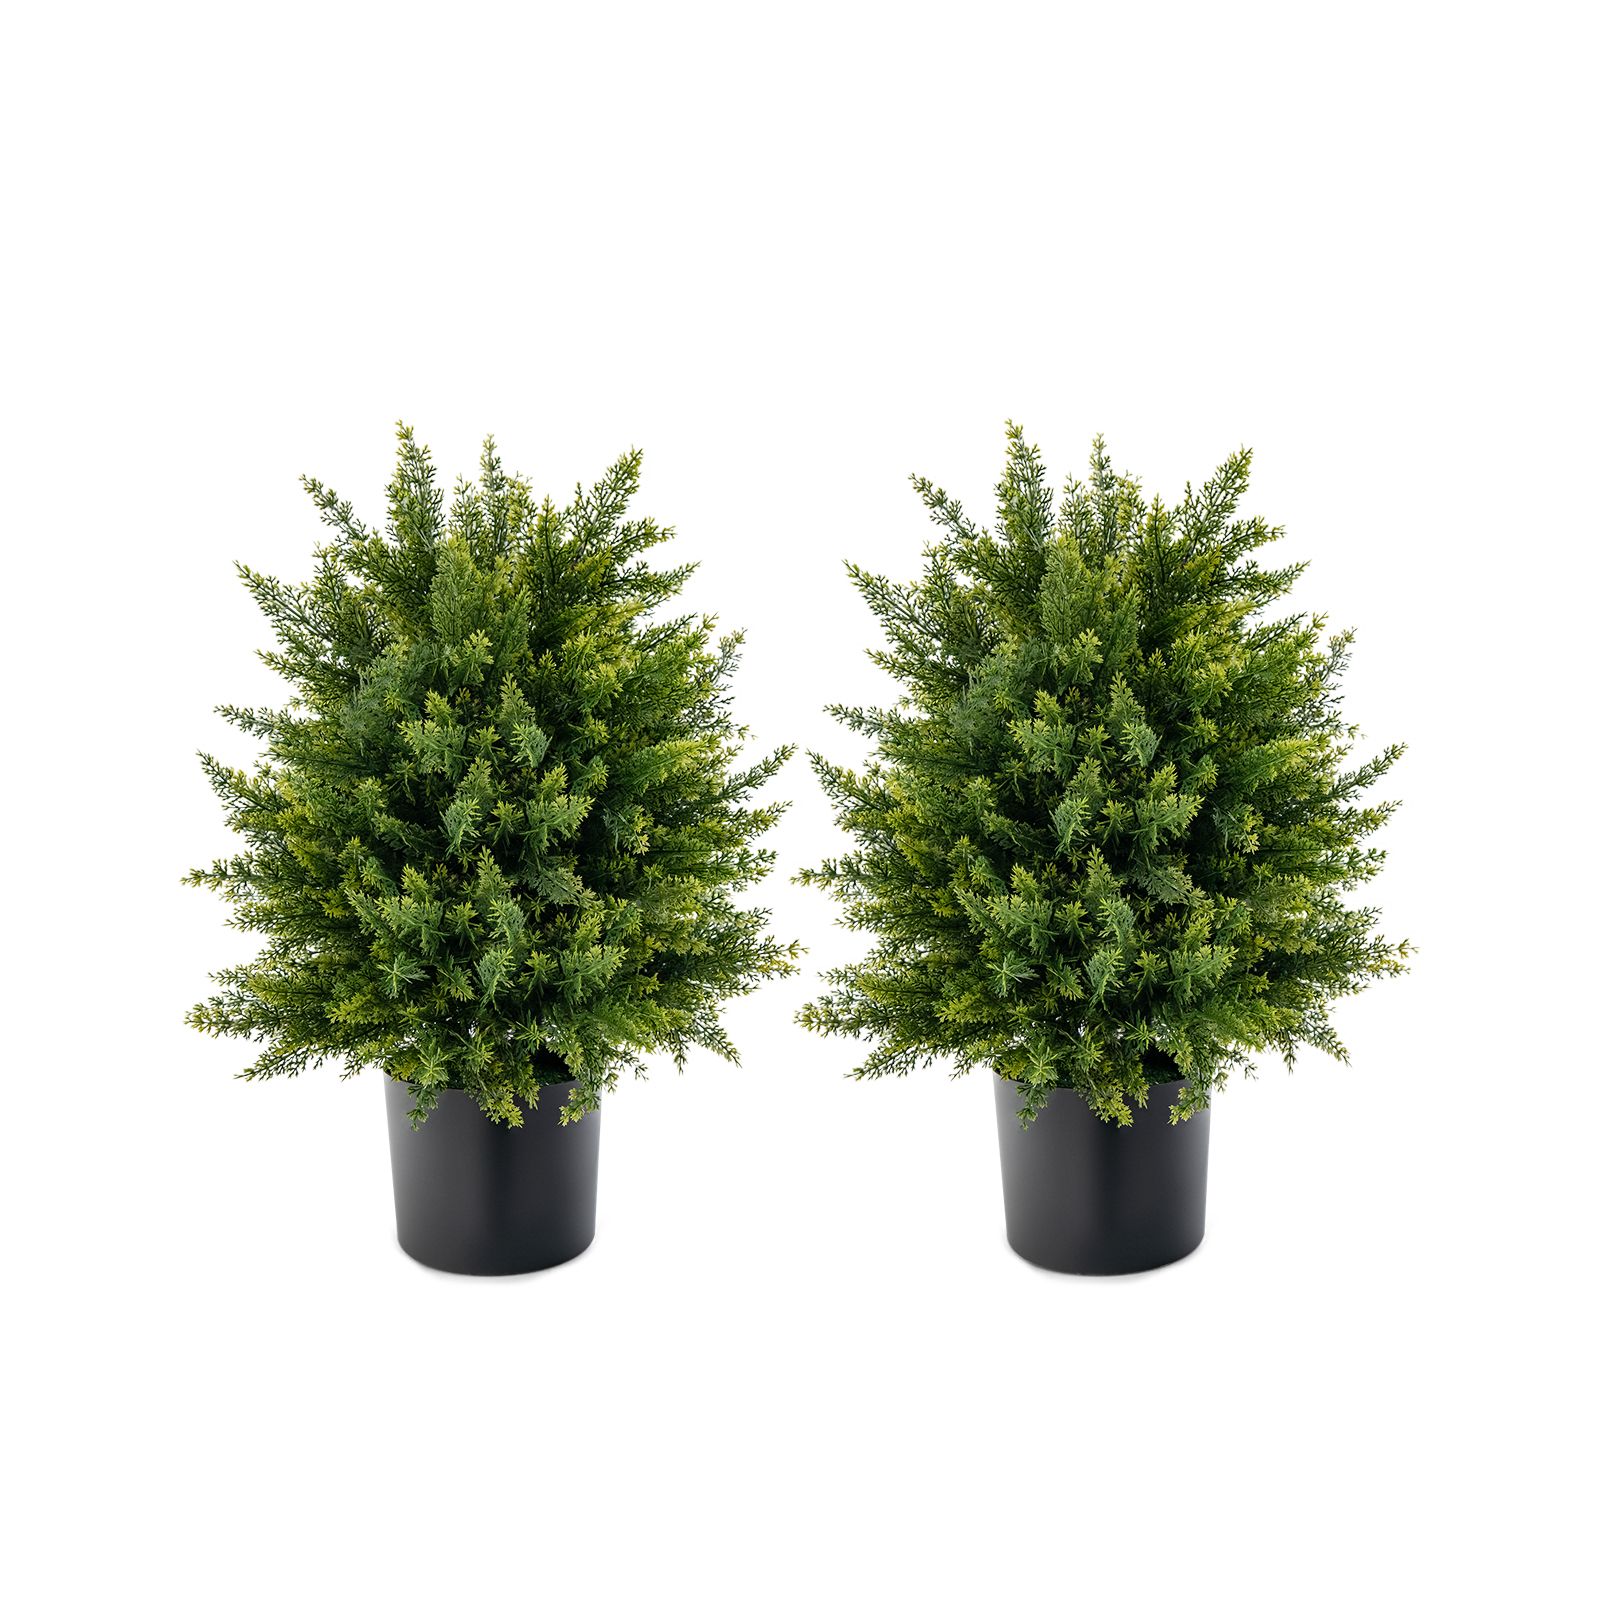 Set of 2 Artificial Cedar Topiary Ball Trees with Cement Pot